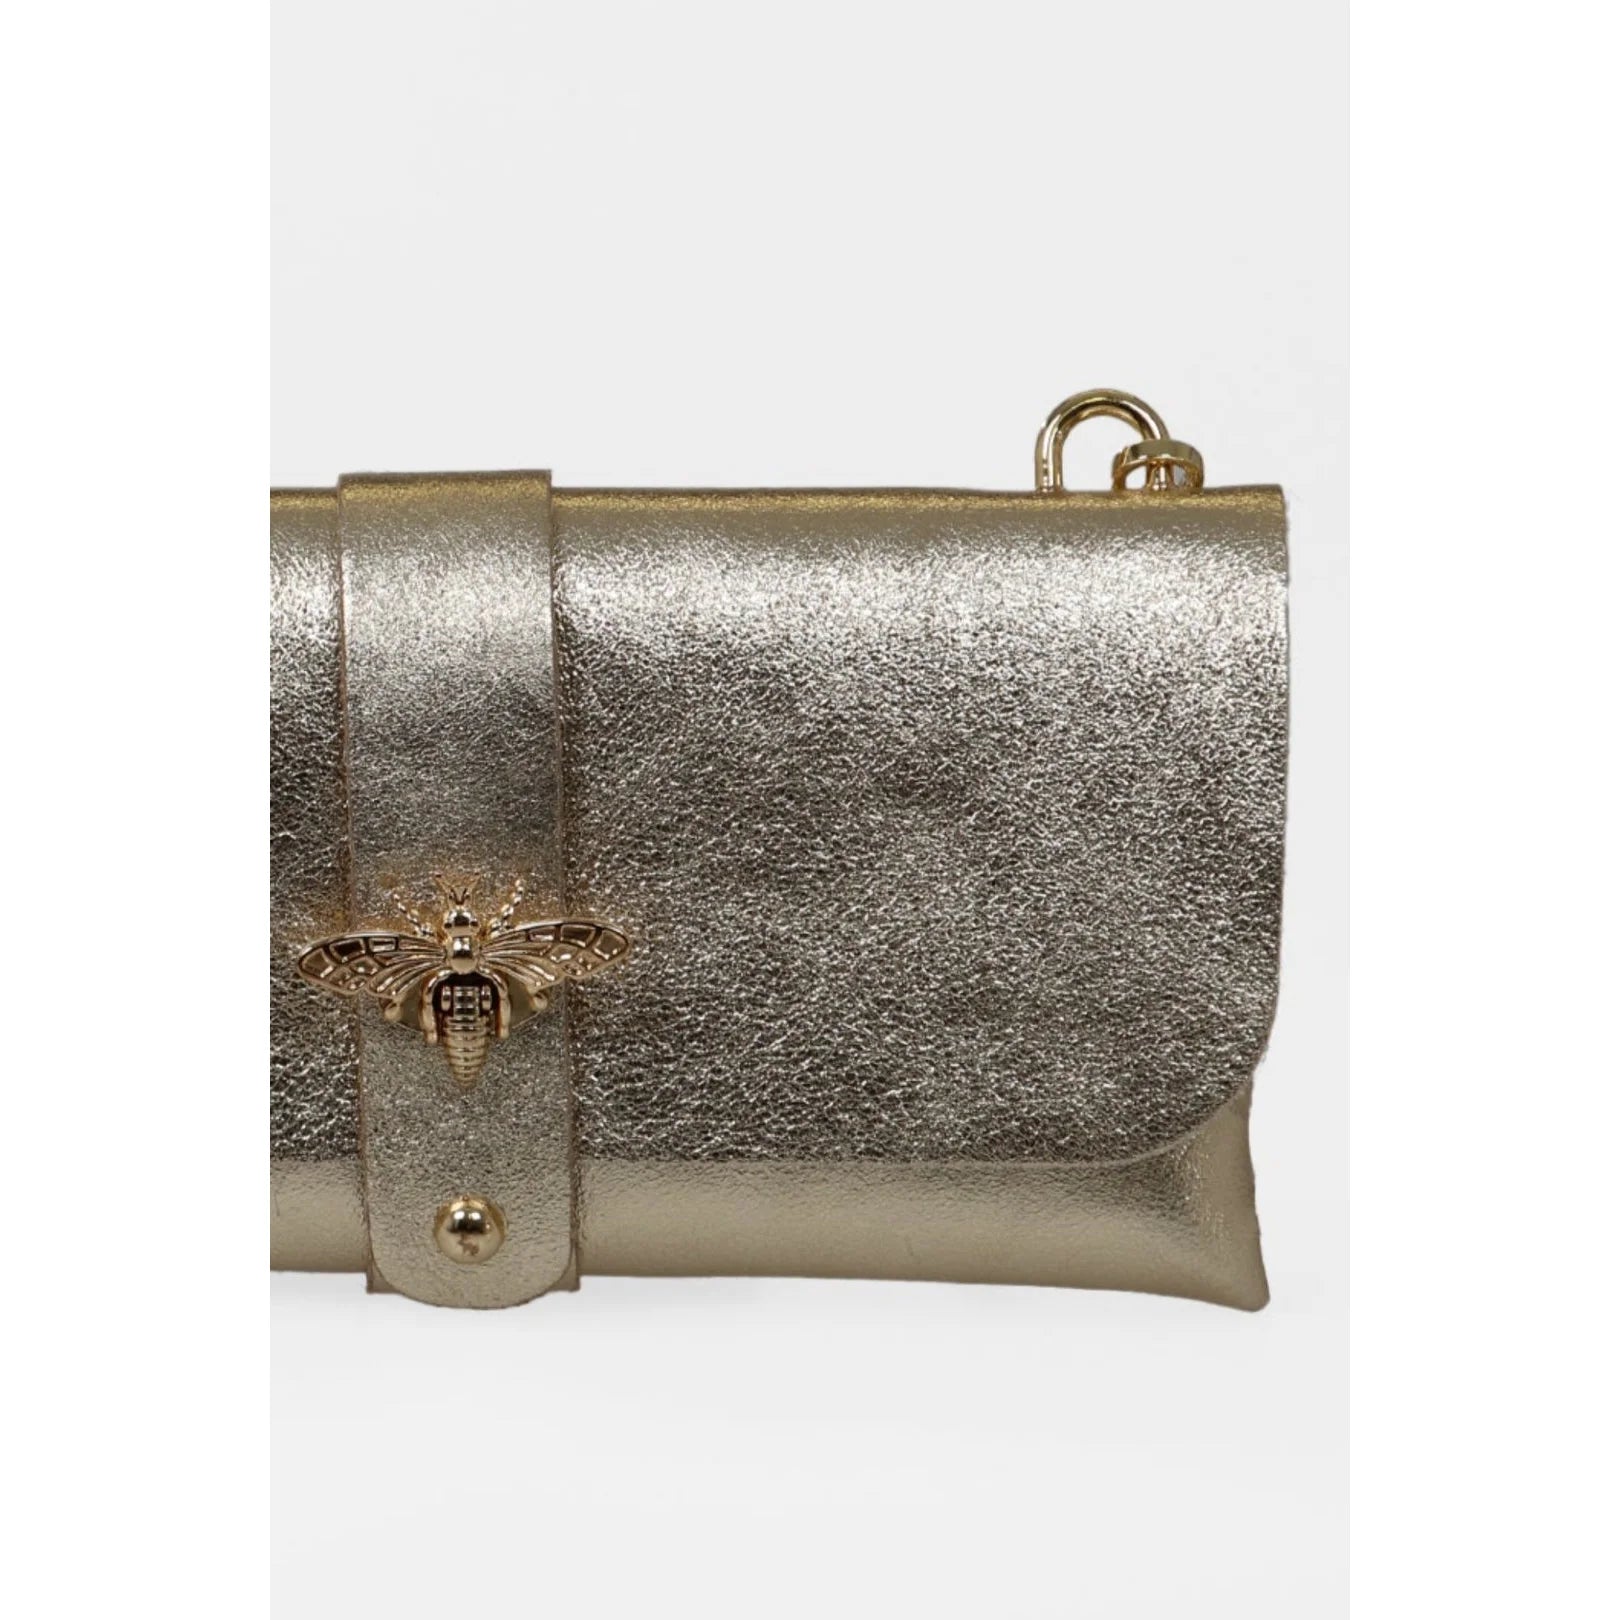 Gold Bee Emblem Metallic Gold Leather Clutch Bag with Gold Chain Strap